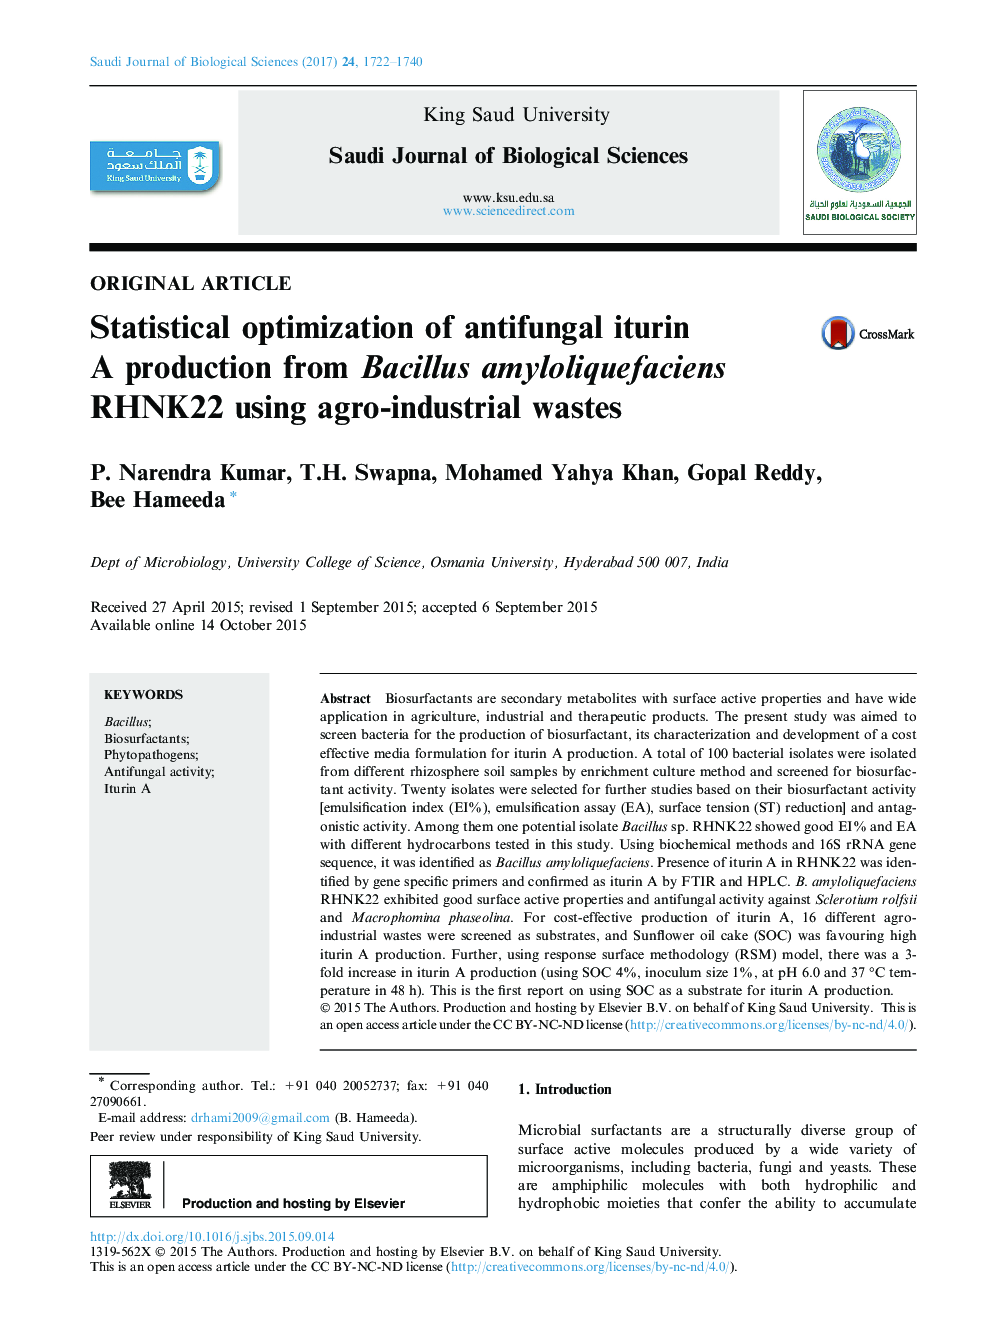 Original articleStatistical optimization of antifungal iturin A production from Bacillus amyloliquefaciens RHNK22 using agro-industrial wastes